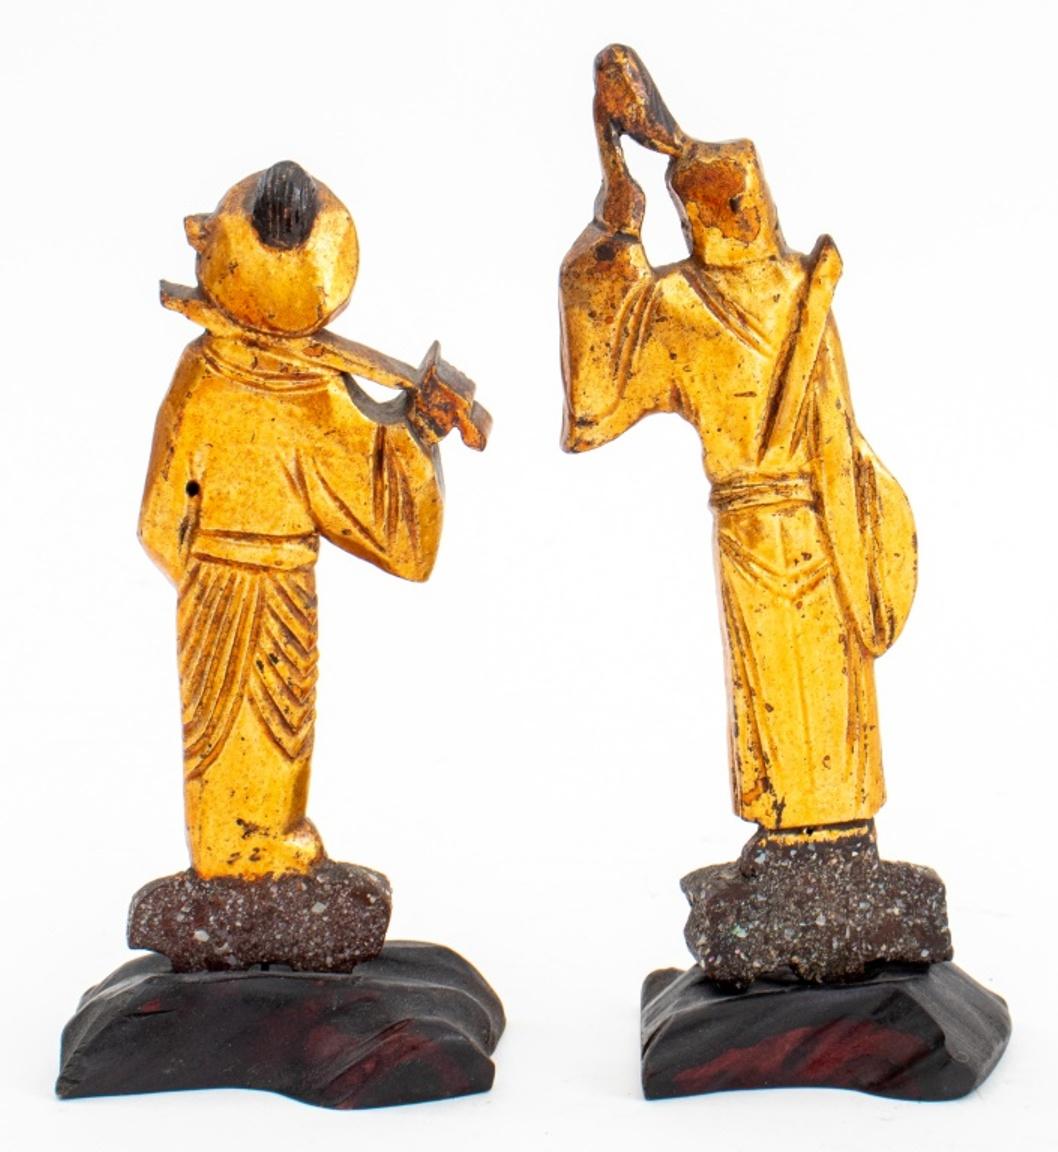 Giltwood Chinese Carved Wood Warrior Figure Sculpture, Pair